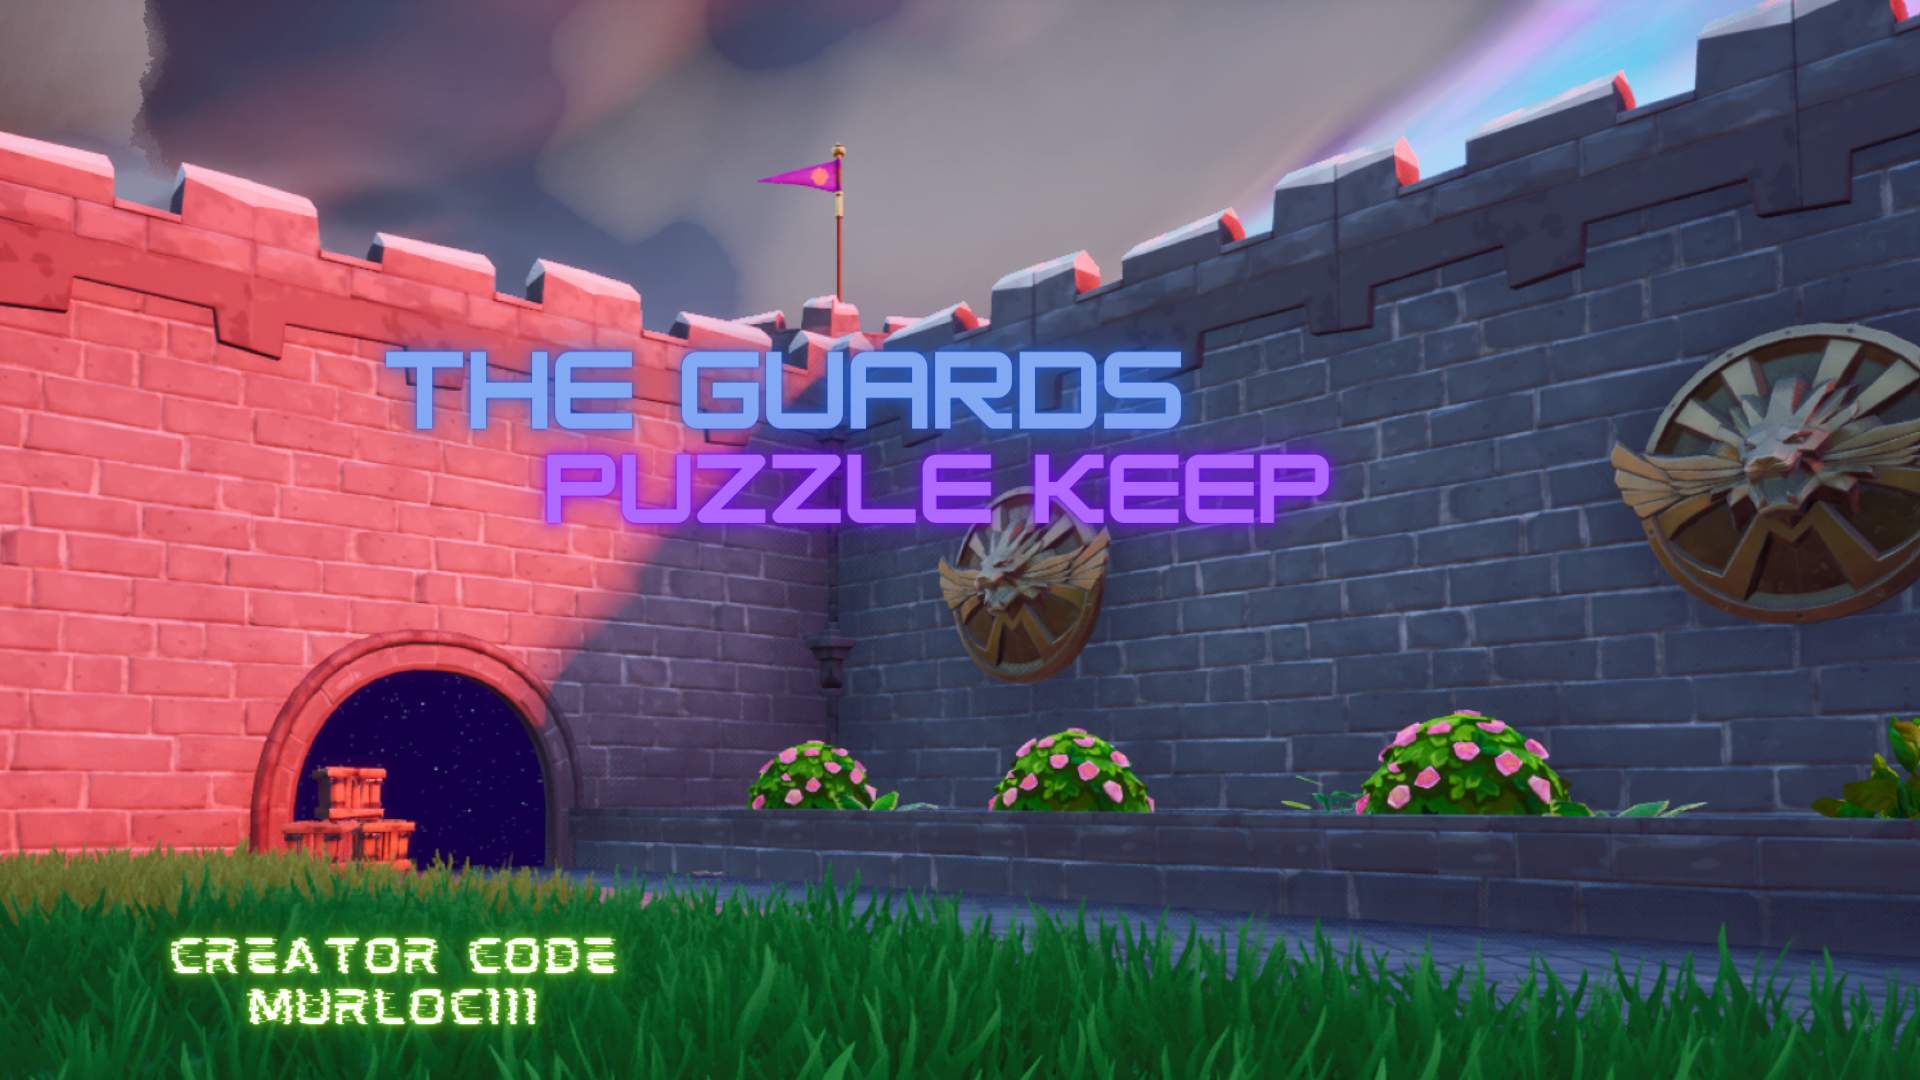 THE GUARDS PUZZLE KEEP